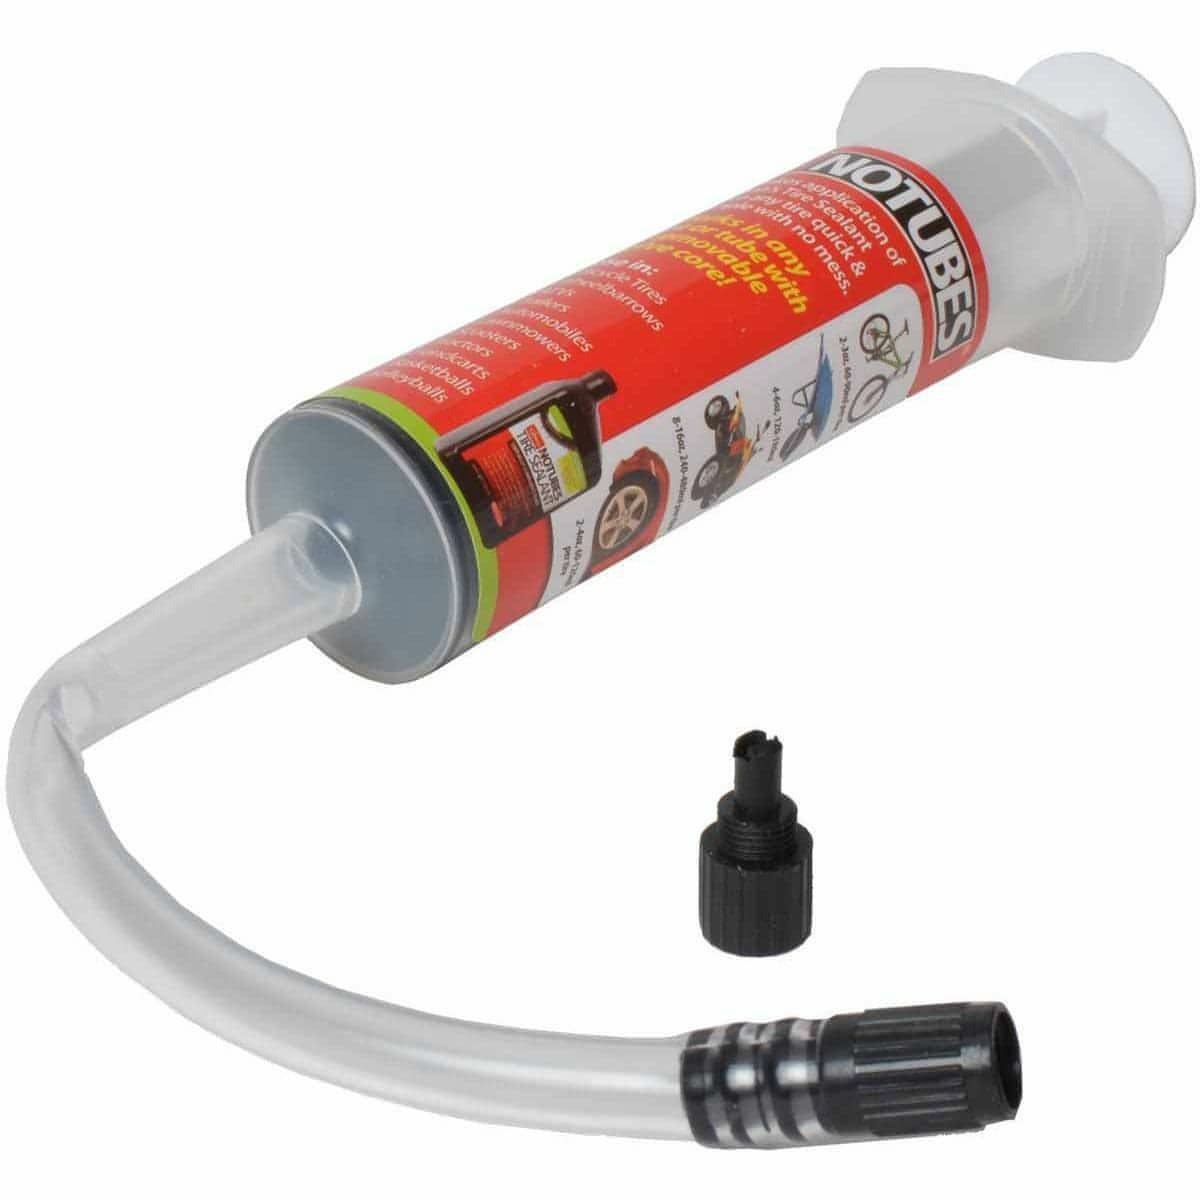 Stans No Tubes The Injector Tubeless Sealant Syringe 183720000151 - Start Fitness